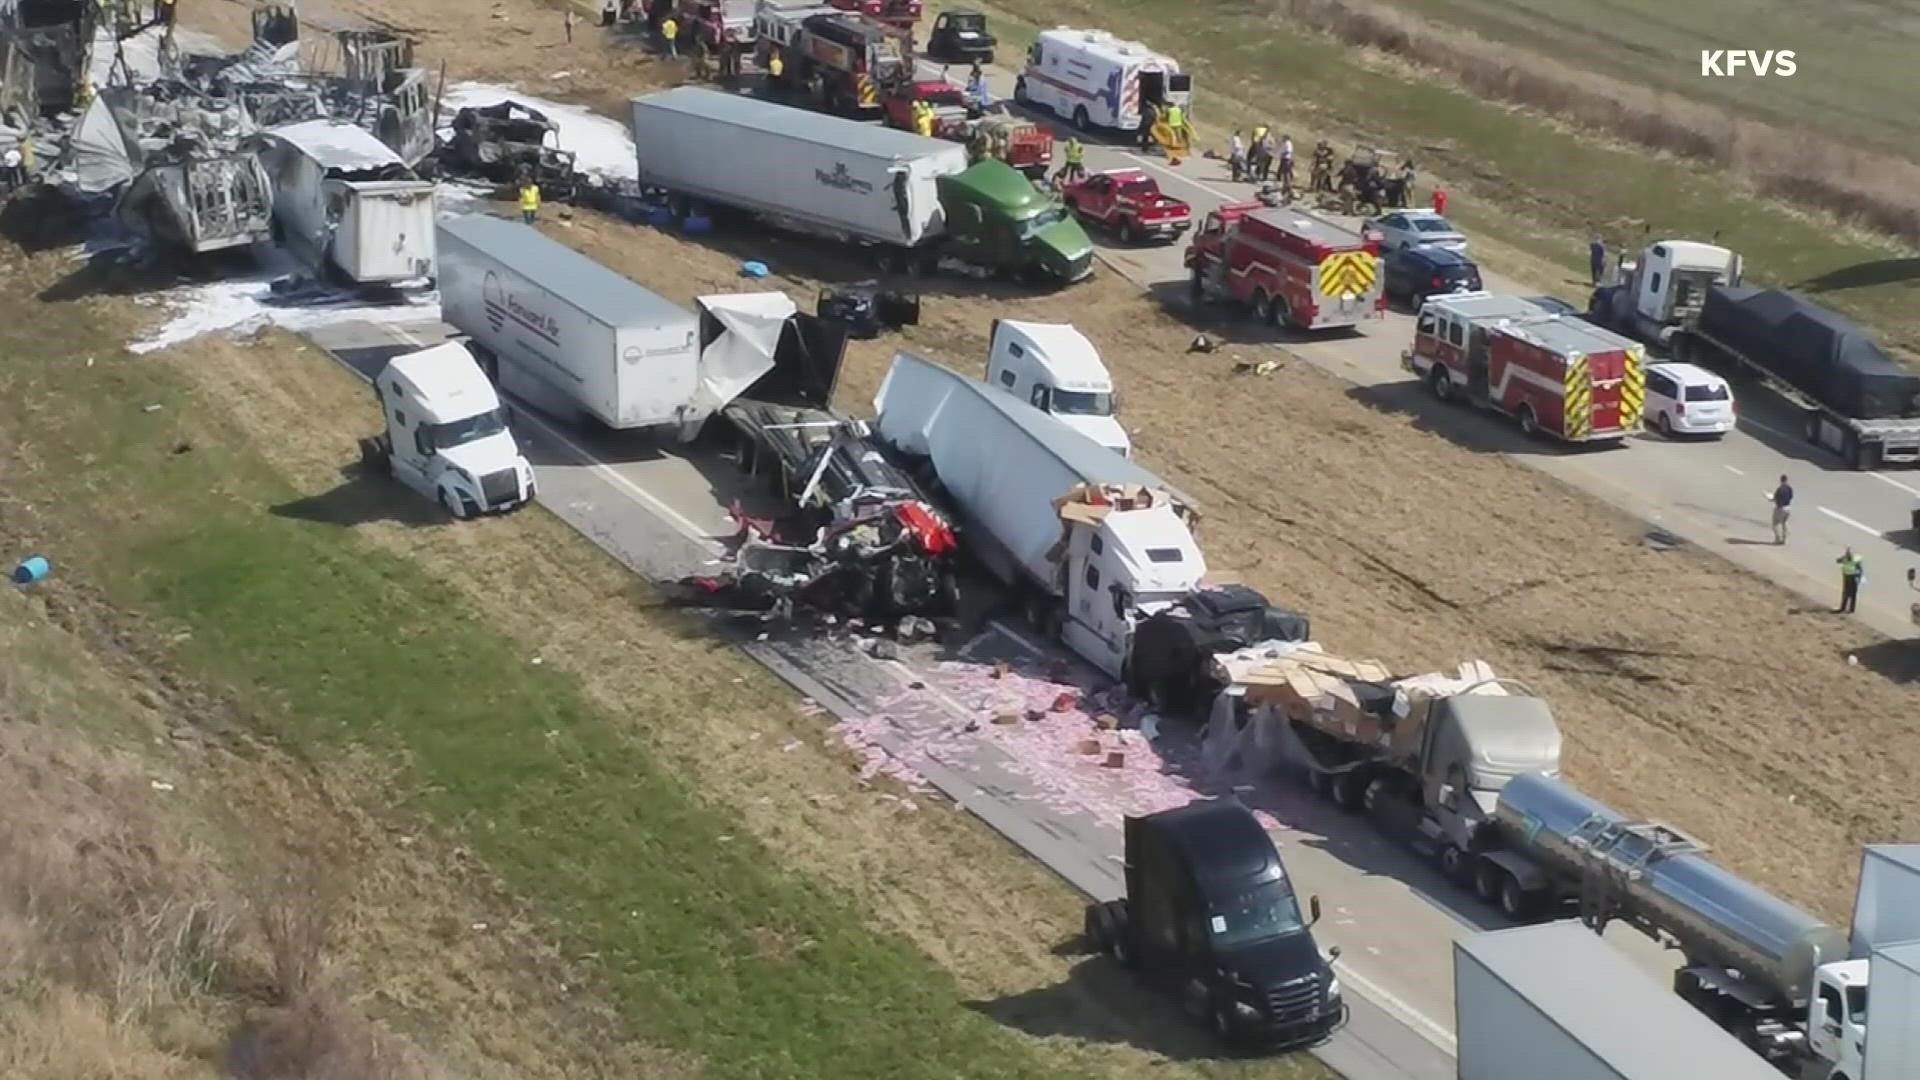 KFVS-TV reported that at least five people were killed in the crashes, but an exact number of injuries and deaths was not available Thursday afternoon. Source: KFVS.